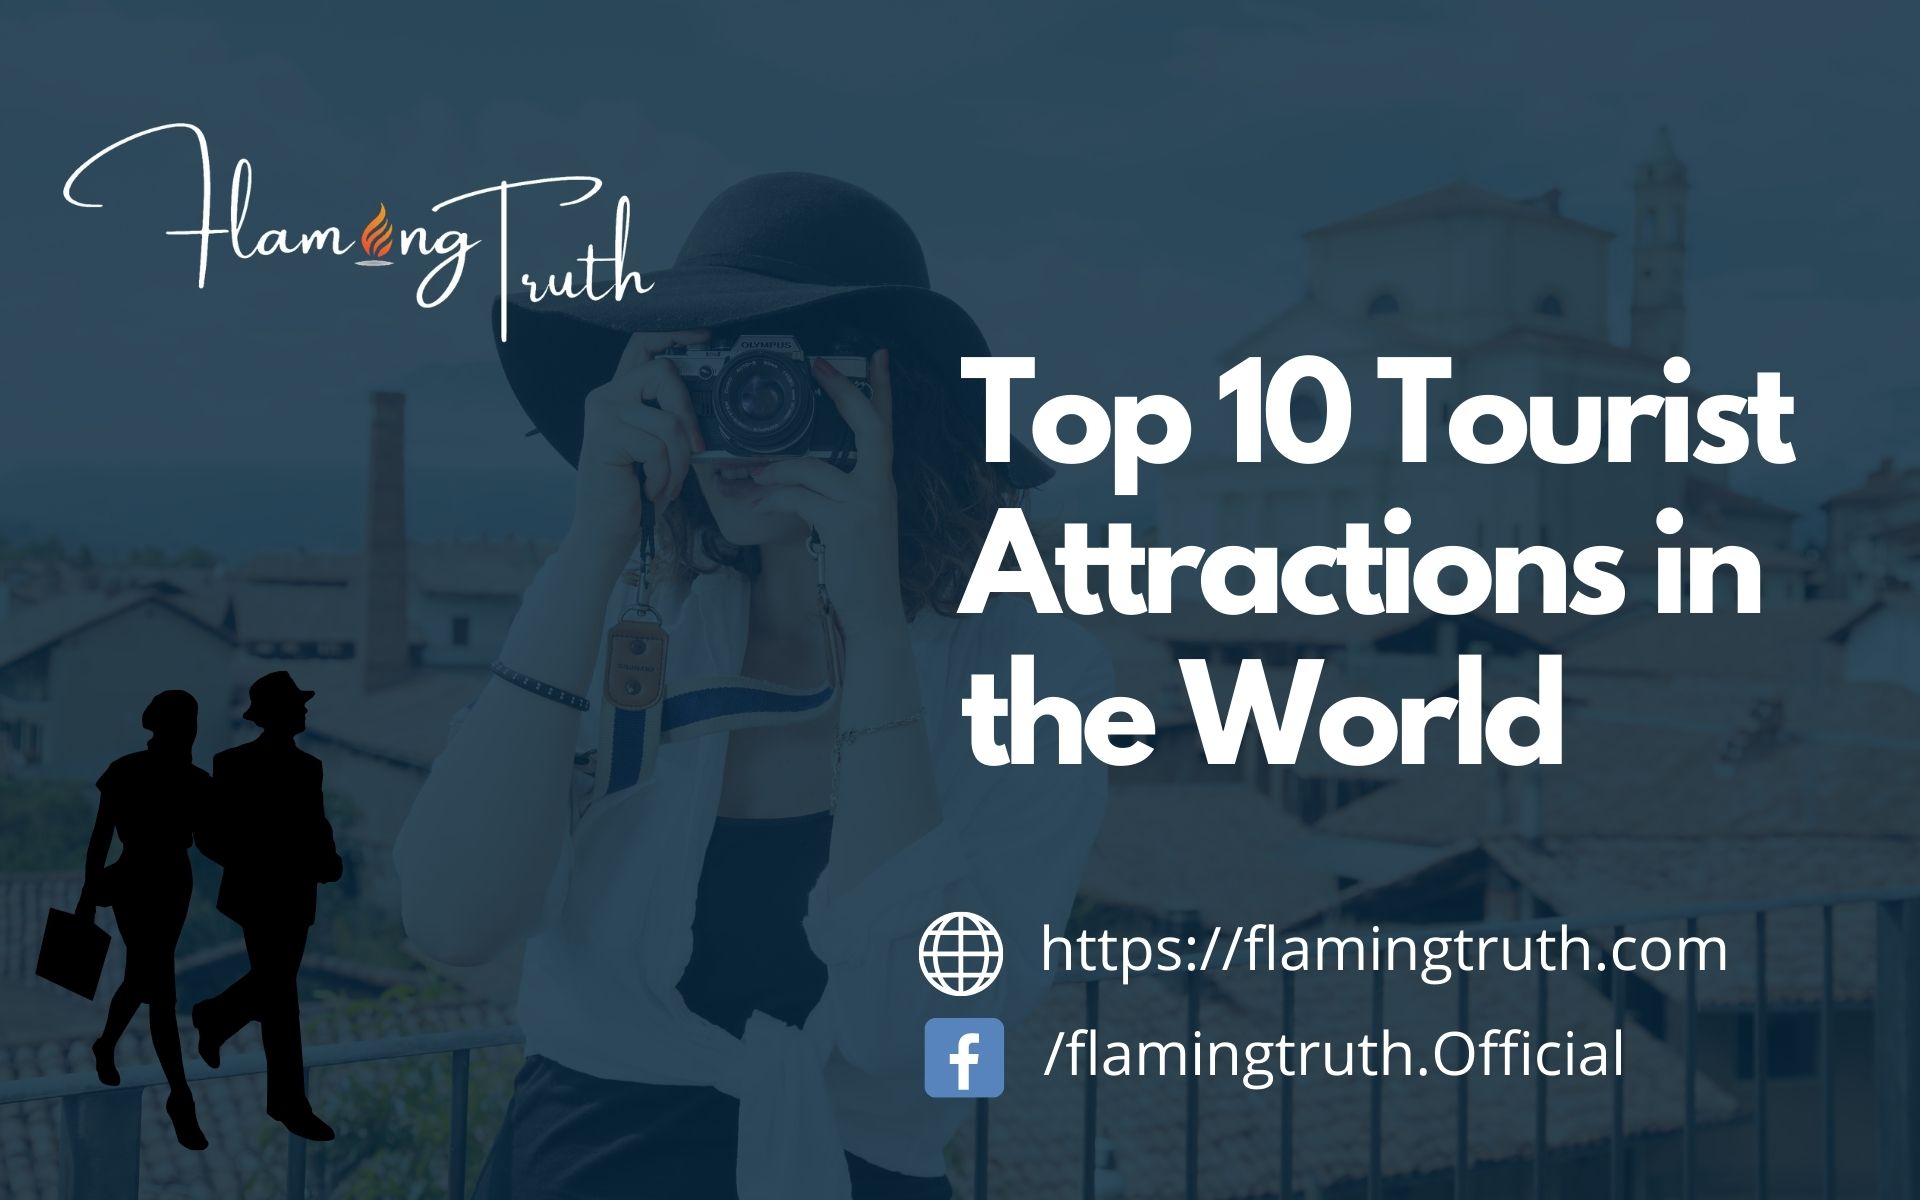 Top 10 Tourist Attractions